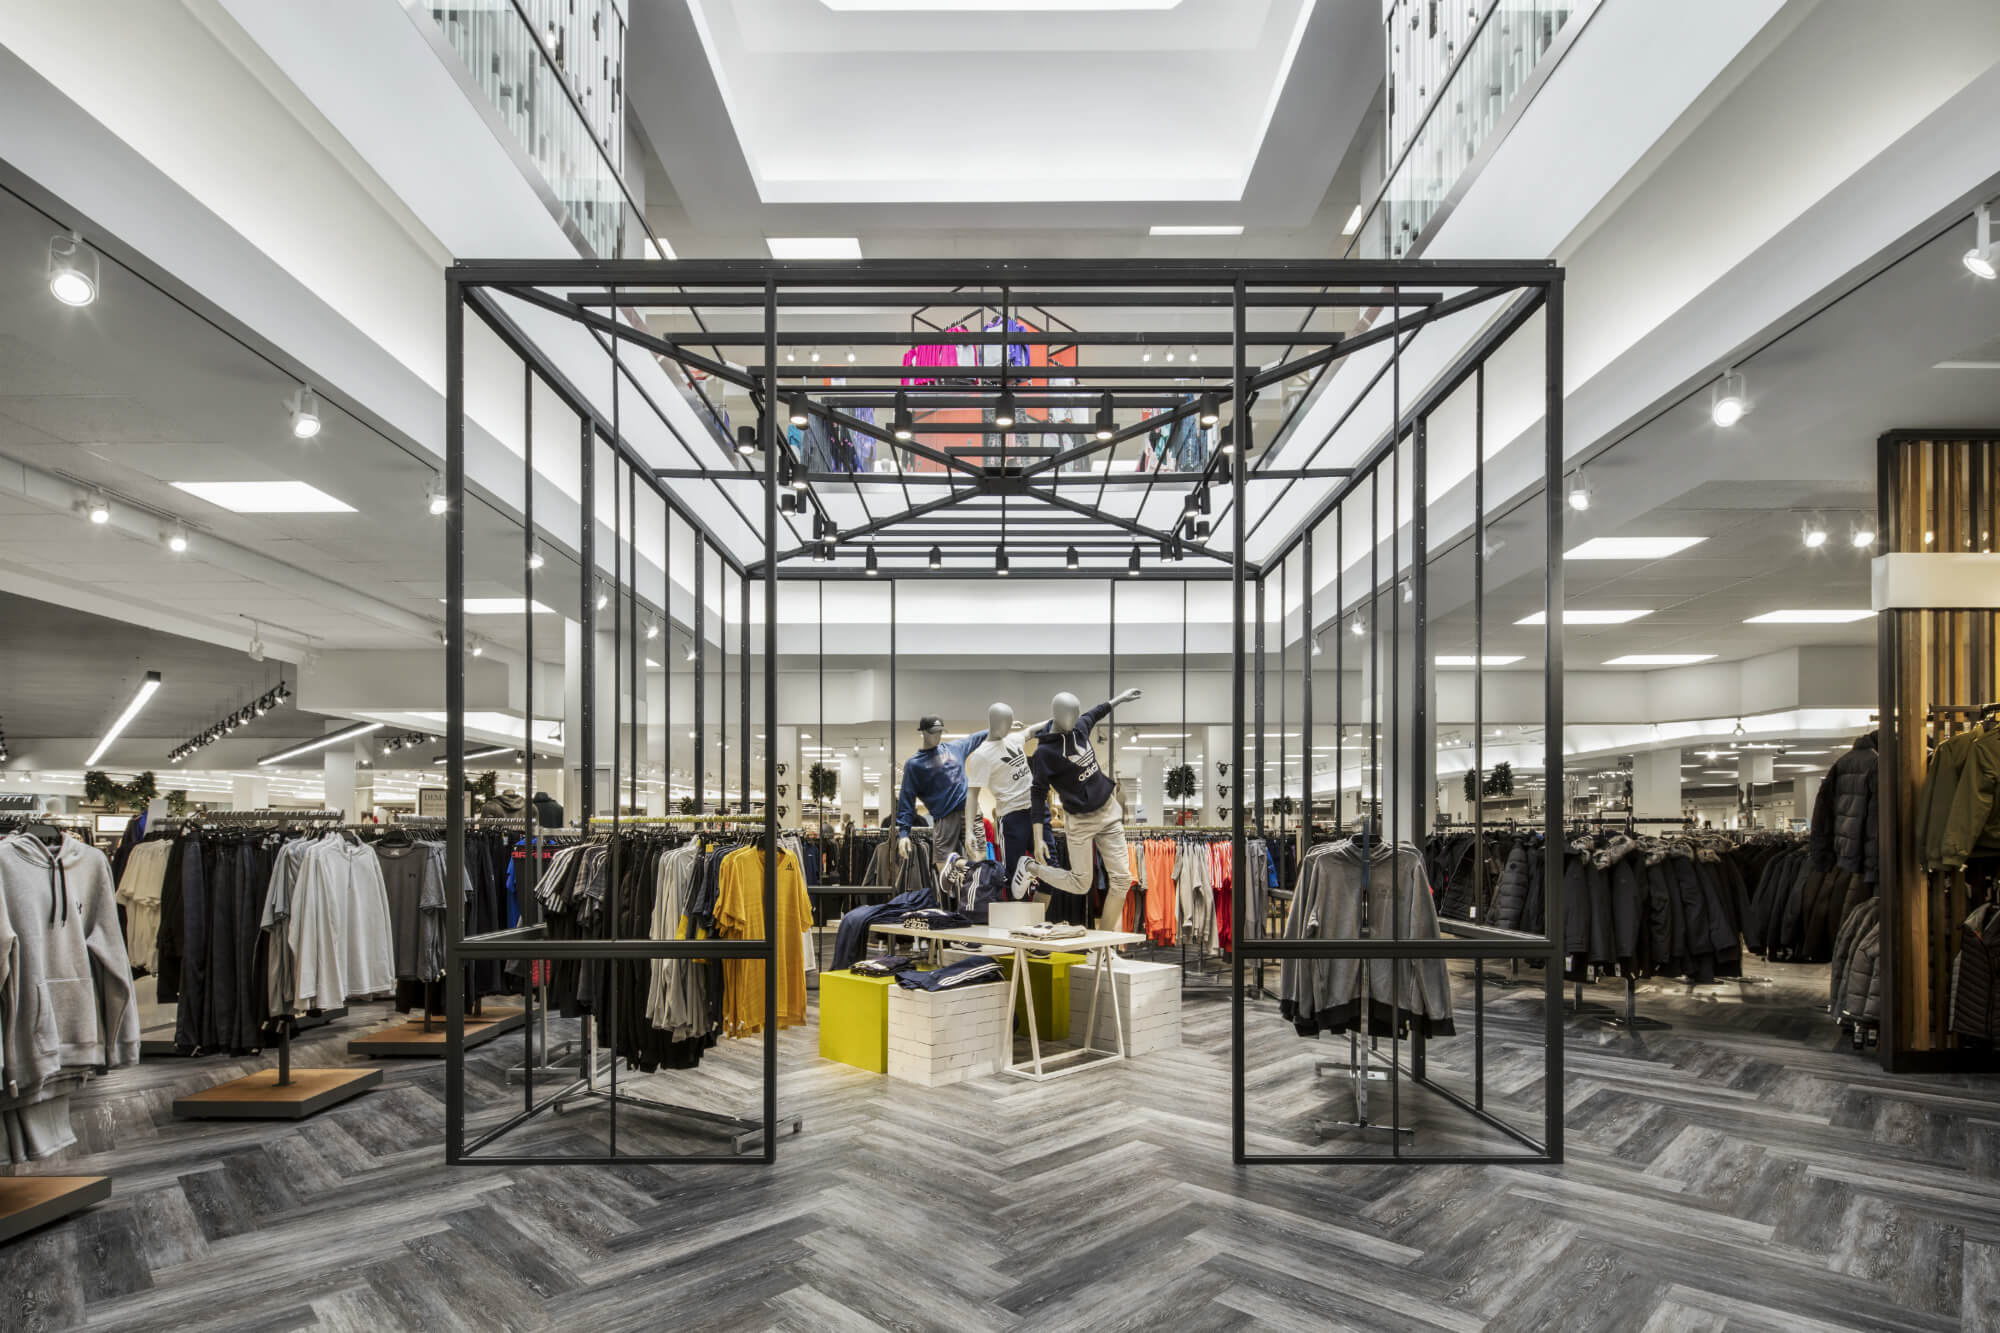 Watch These Top Retail Design Trends in 2022 - Image 4